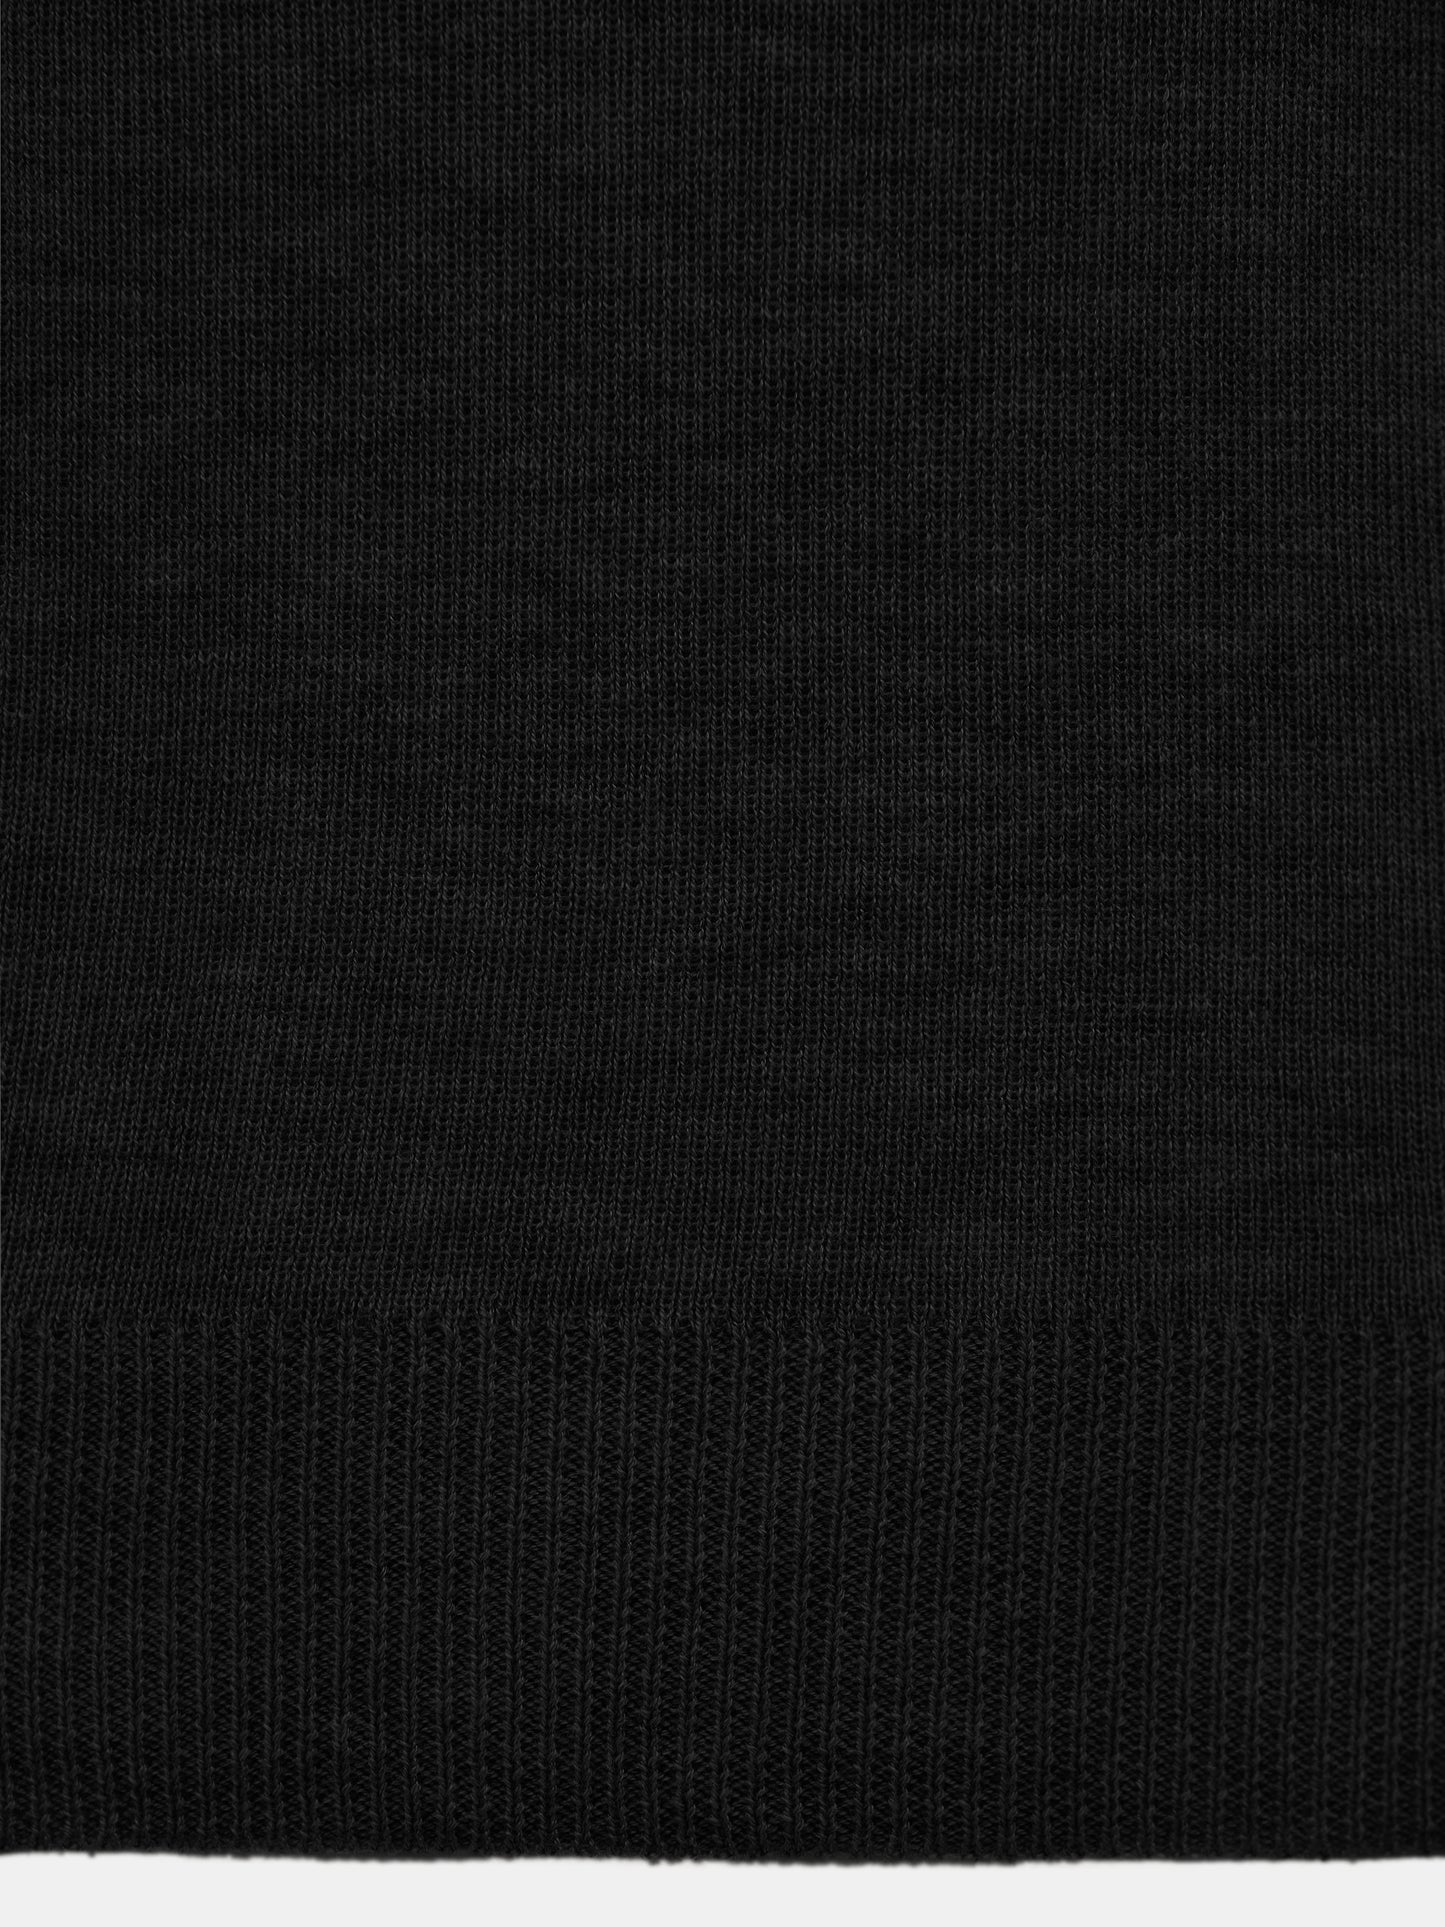 High-Neck Compact Knit, Black